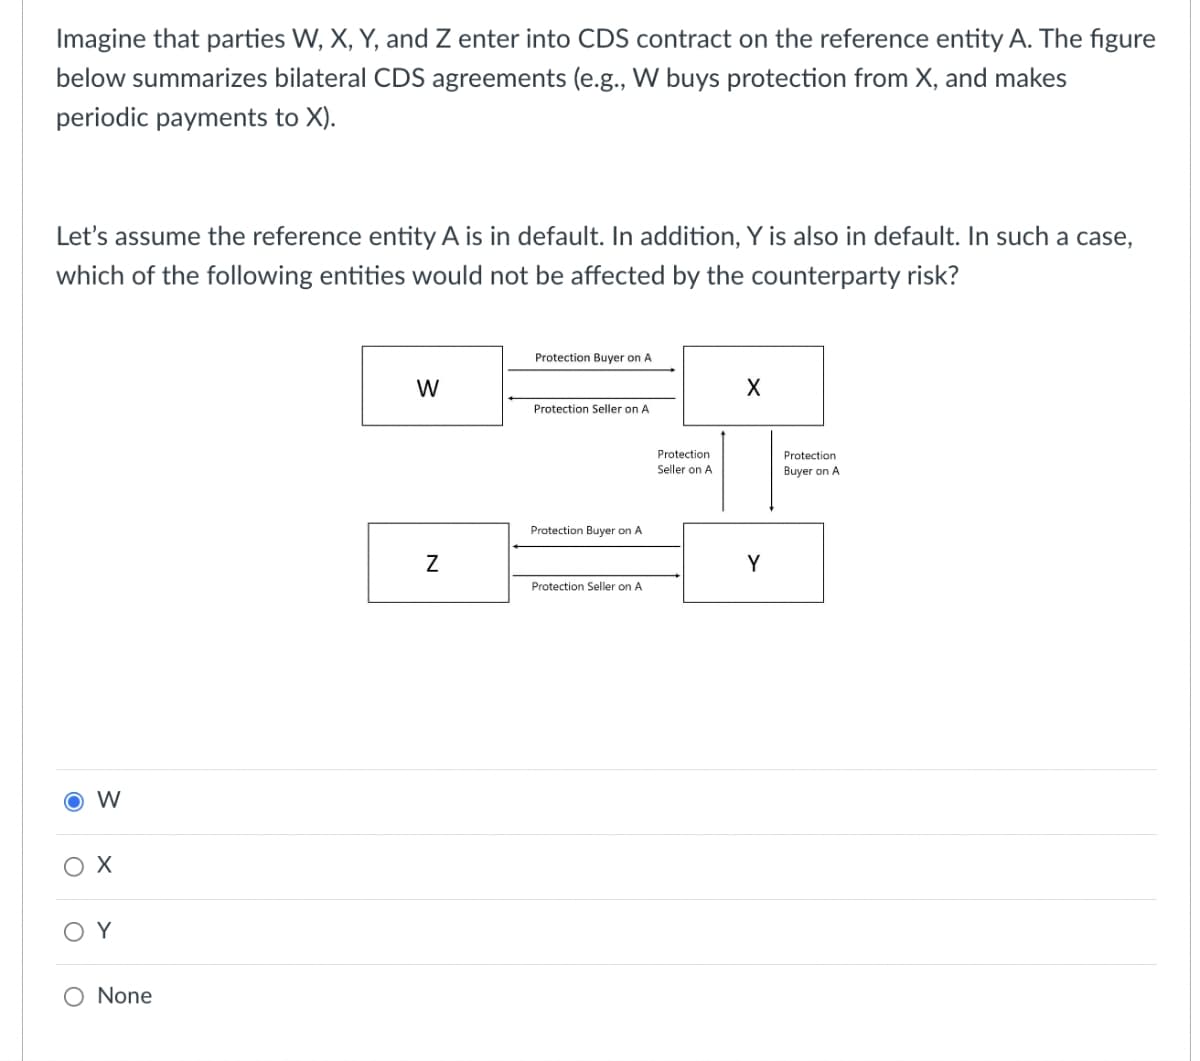 Imagine that parties W, X, Y, and Z enter into CDS contract on the reference entity A. The figure
below summarizes bilateral CDS agreements (e.g., W buys protection from X, and makes
periodic payments to X).
Let's assume the reference entity A is in default. In addition, Y is also in default. In such a case,
which of the following entities would not be affected by the counterparty risk?
W
X
O Y
○ None
Protection Buyer on A
W
X
Protection Seller on A
N
Protection
Seller on A
Protection
Buyer on A
Protection Buyer on A
Y
Protection Seller on A